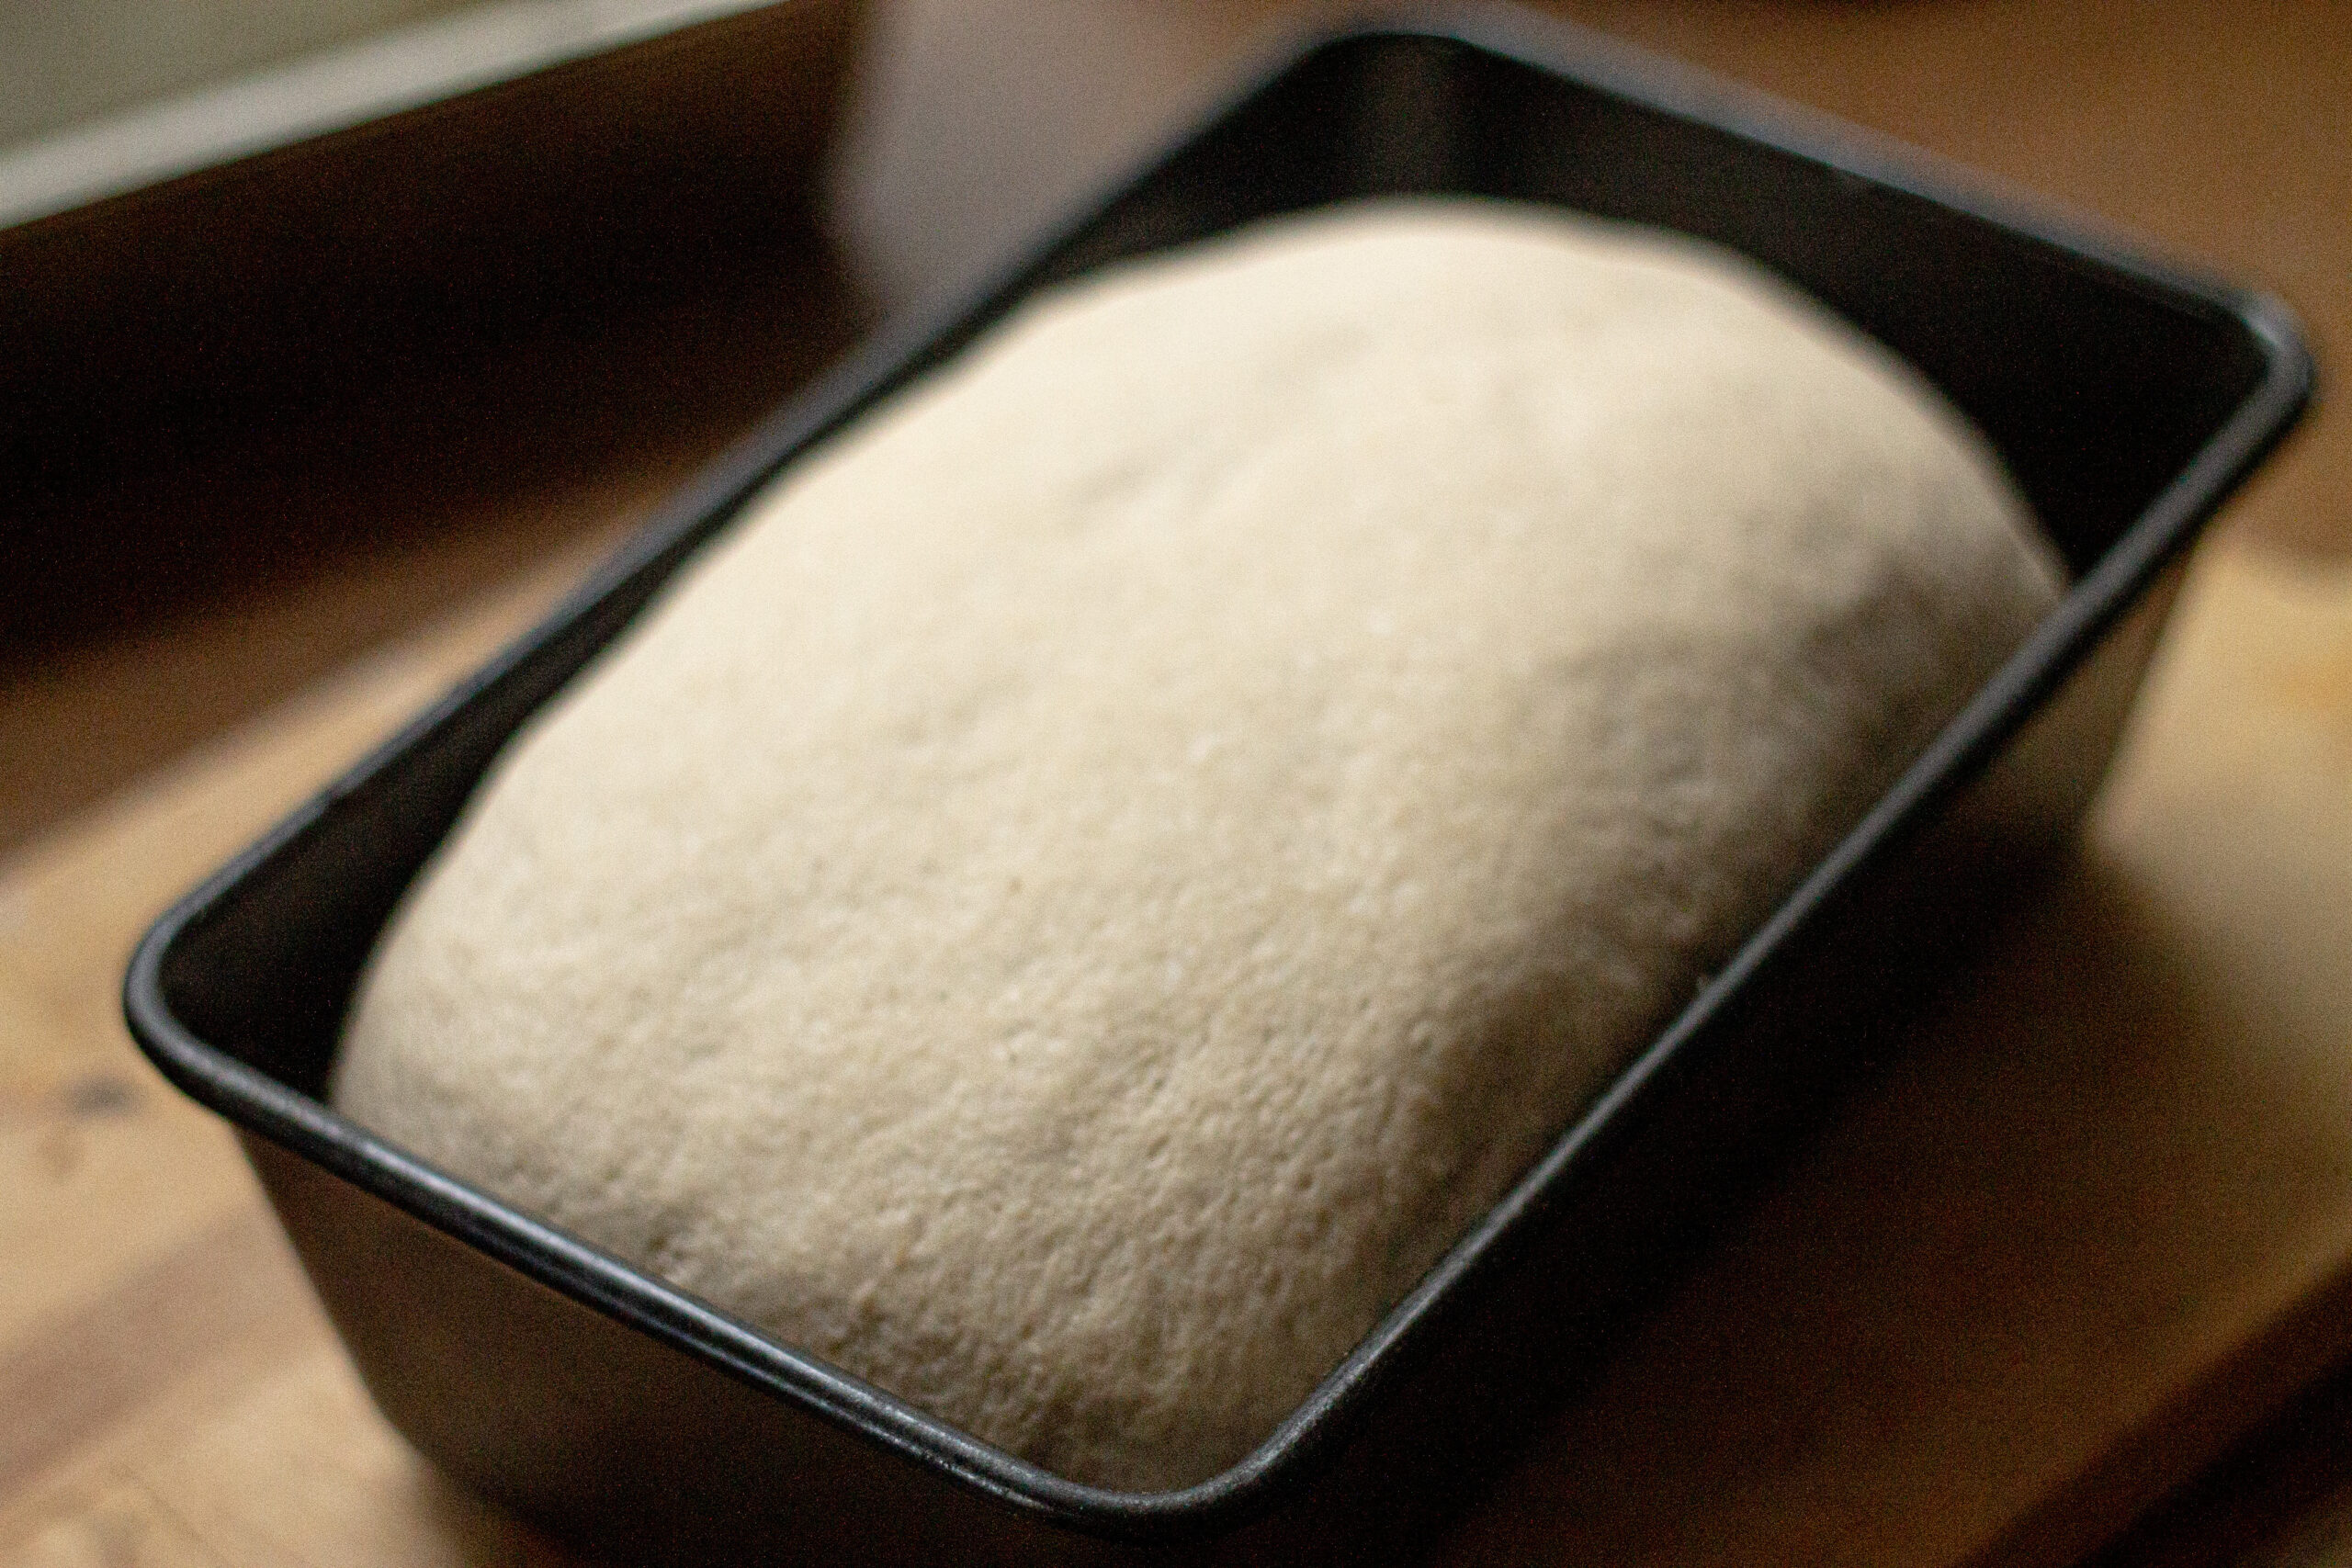 Risen dough waiting to be baked